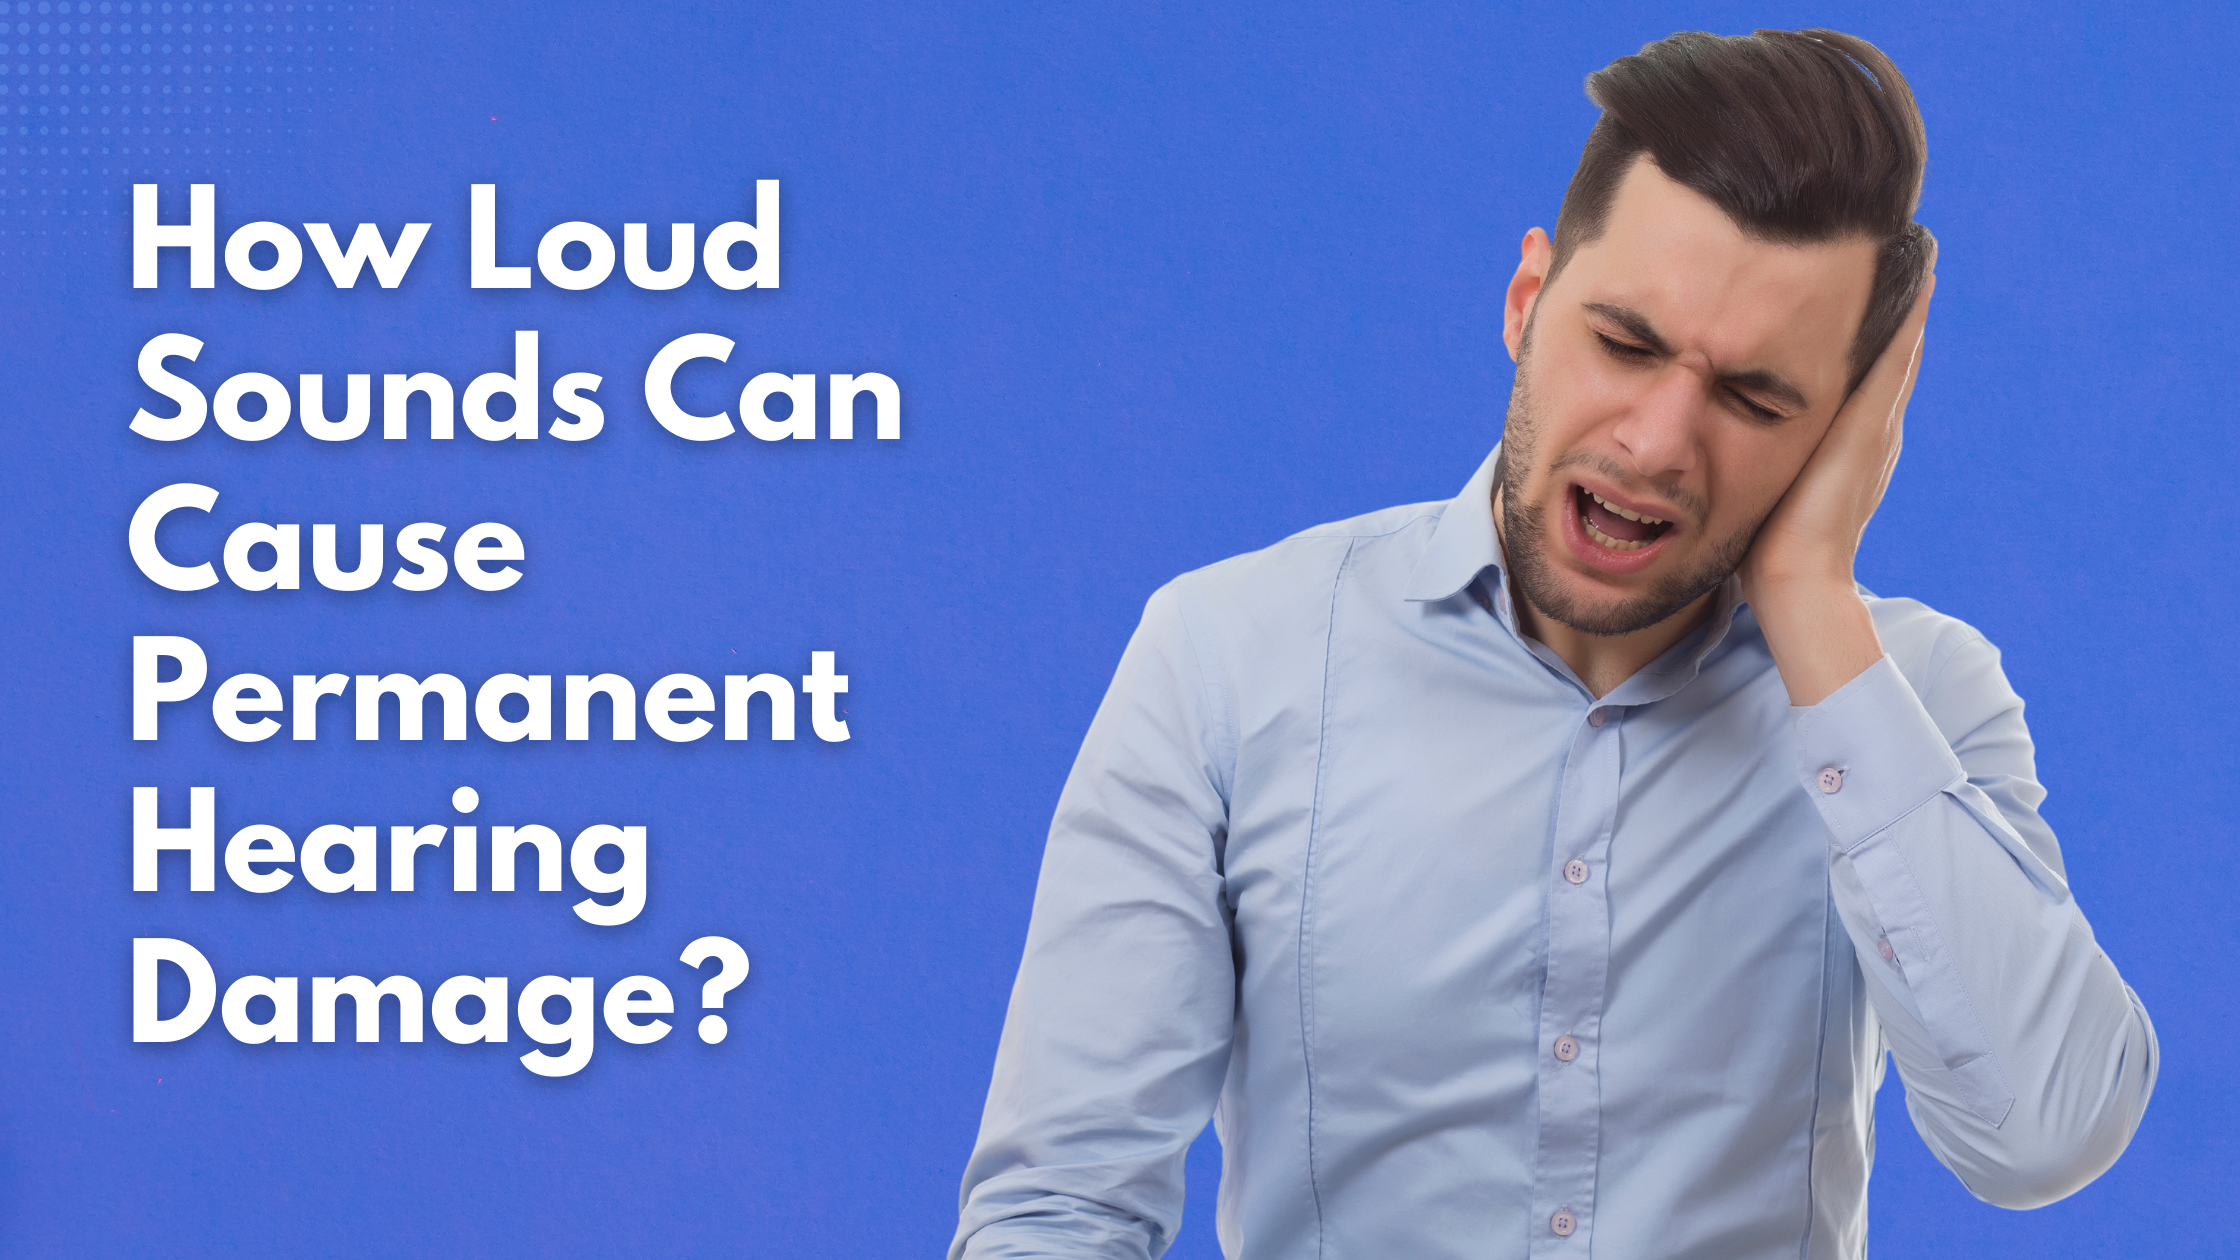 How Loud Sounds Can Cause Permanent Hearing Damage